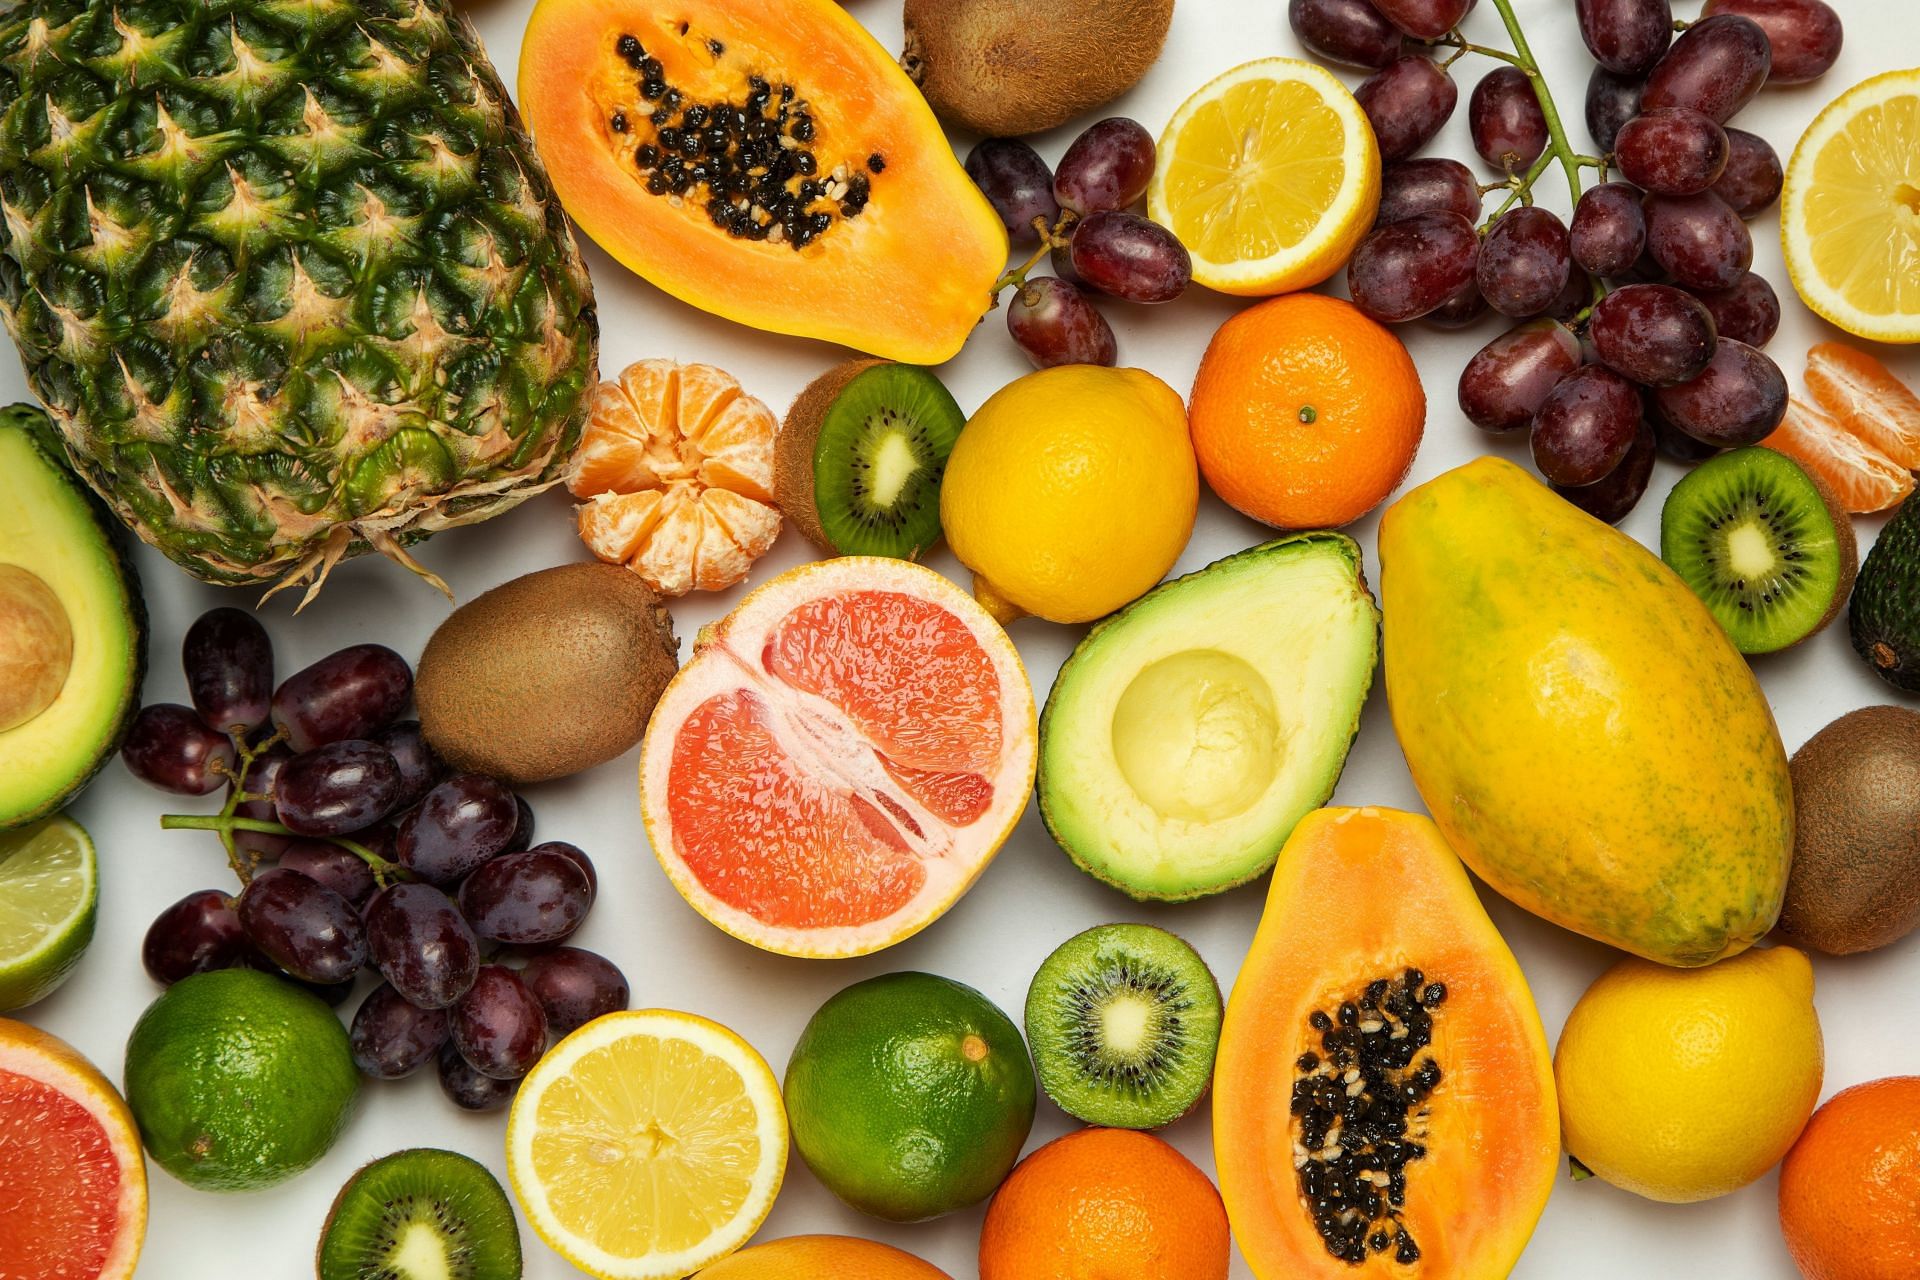 Fruits with low glycemic index (julia zolotova)